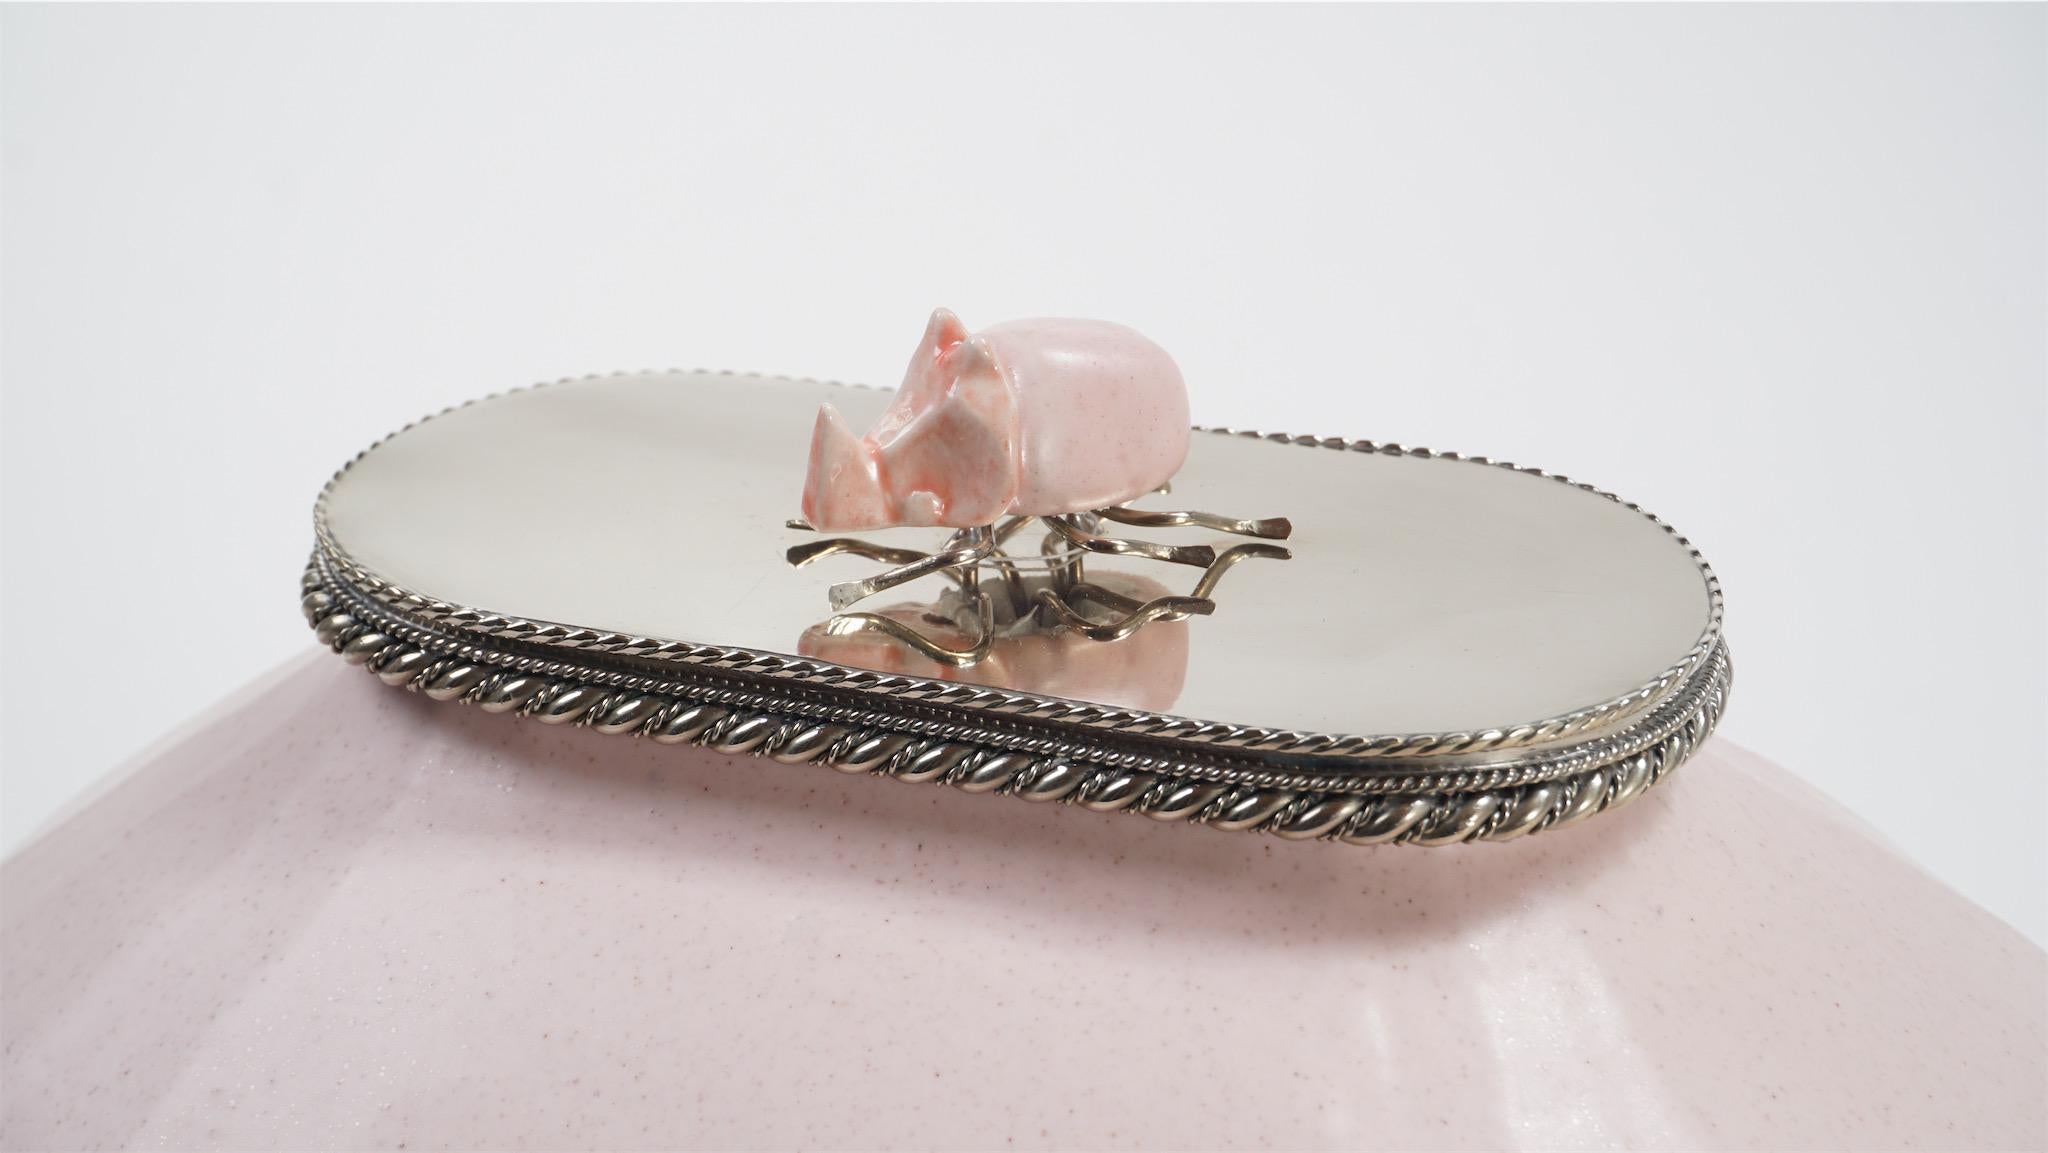 Mexican Pink Ceramic Base by Estudio Guerrero Made with Glazed Ceramic and White Metal